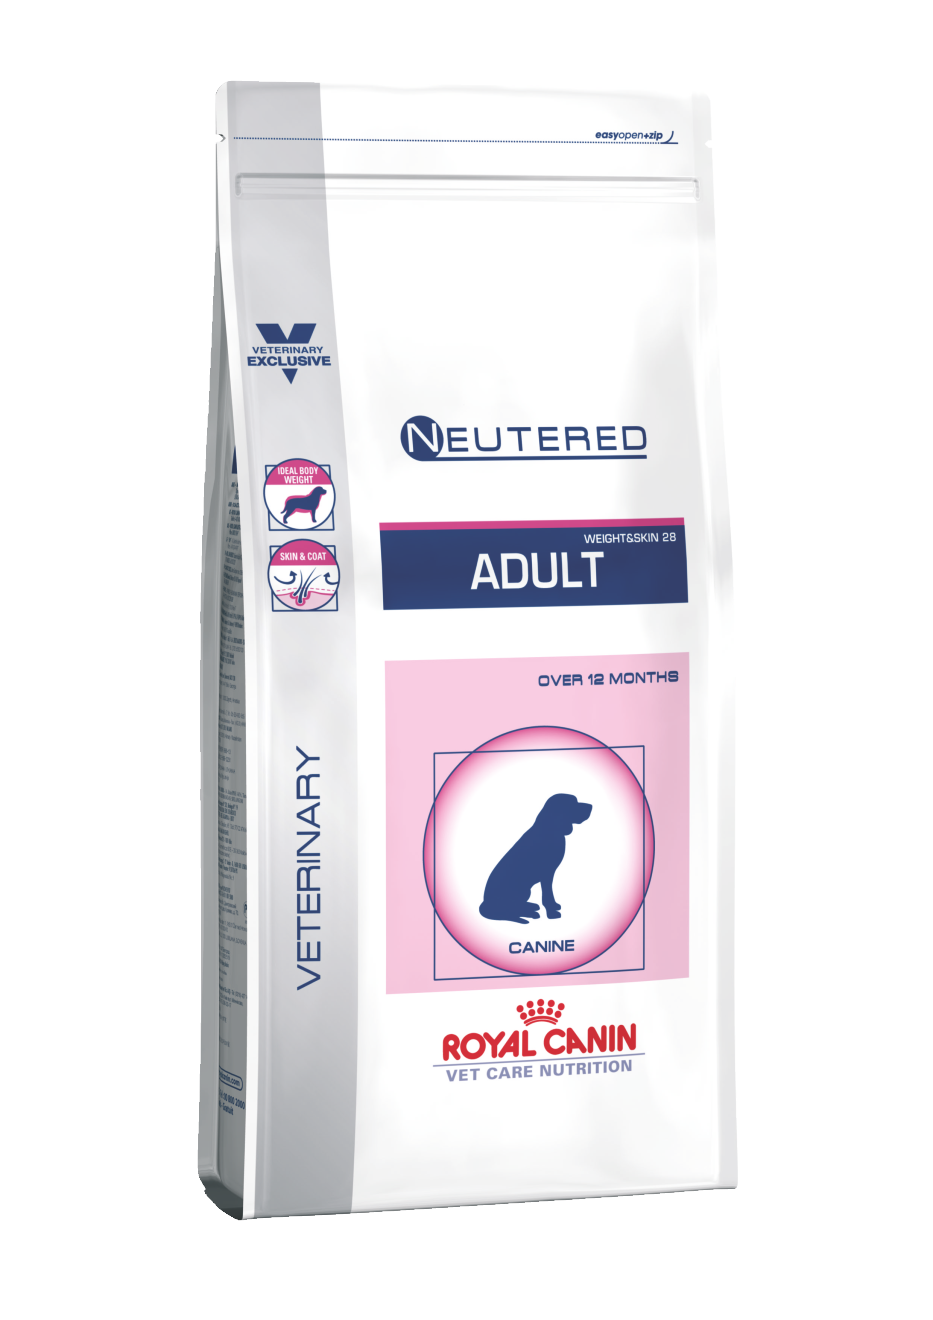 royal canin neutered male cat food 10kg